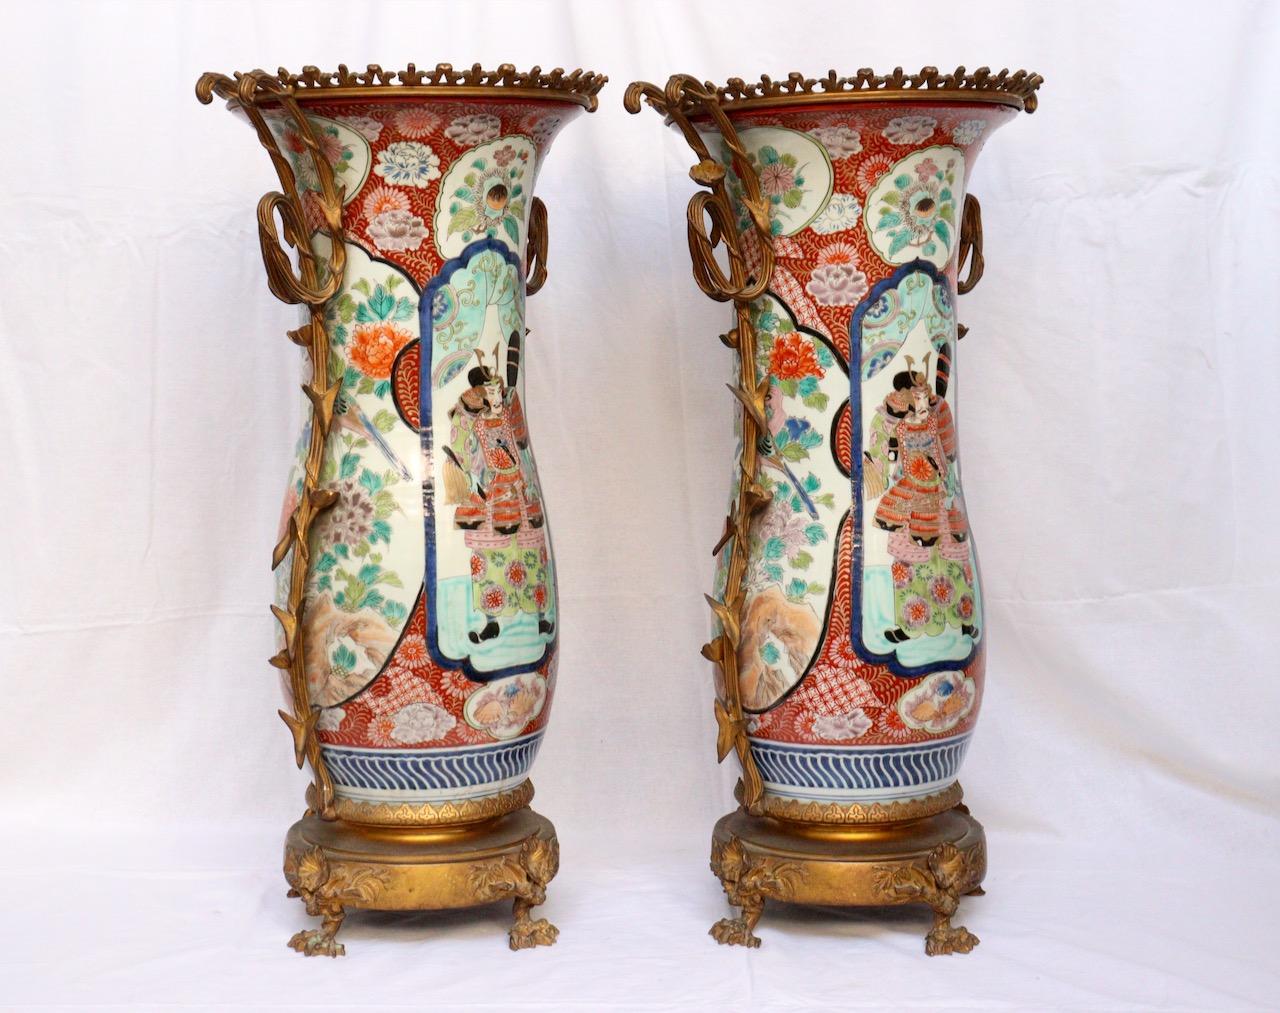 An impressive 19th century Japanese porcelain and ormolu-mounted pair of vases
Polychromed hand painted design of Samouraïs, birds and flowers on a red background,
circa 1880
With original zinc container.

 